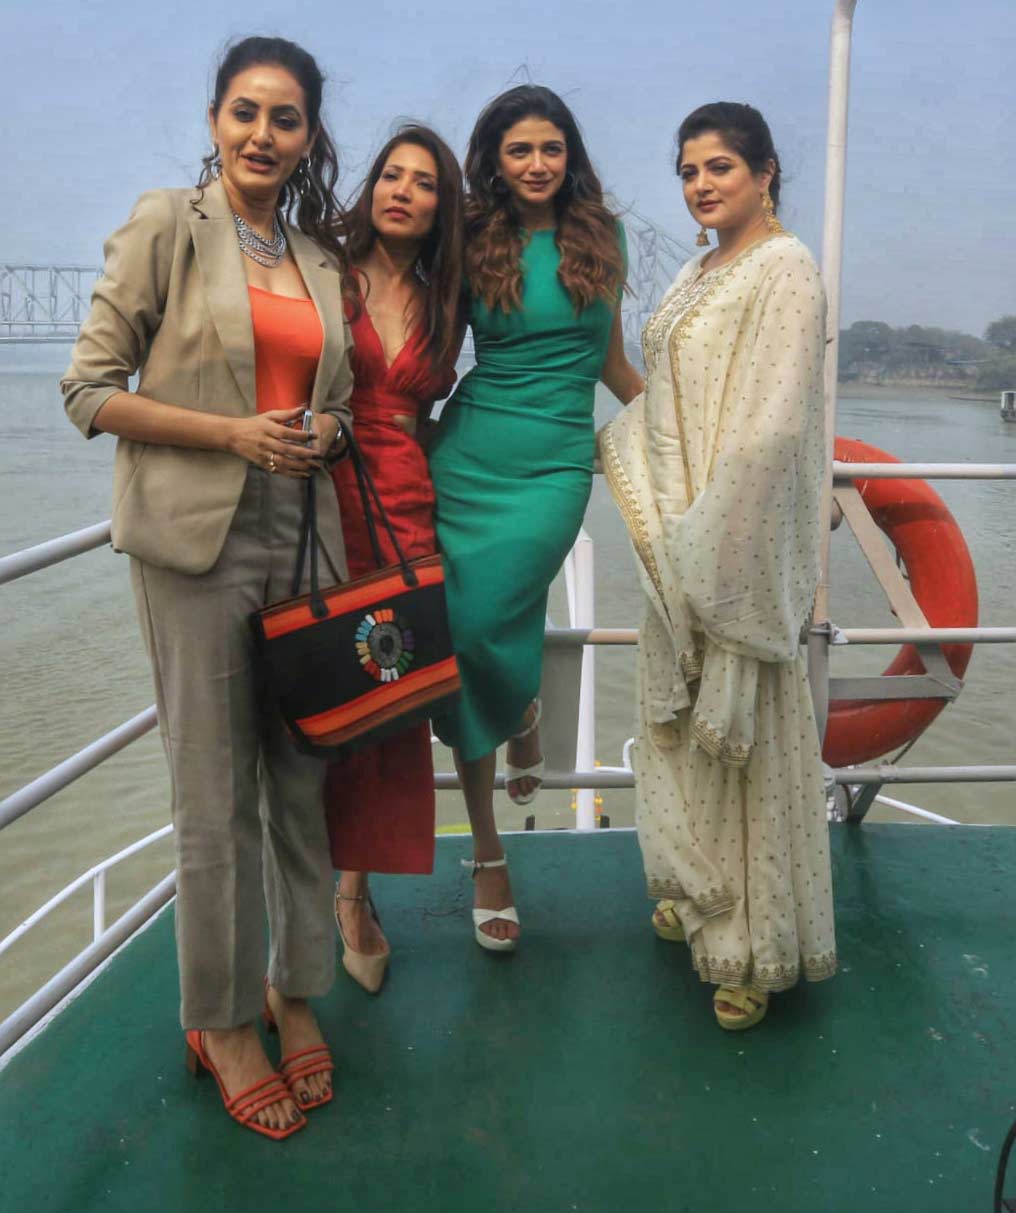 On Friday, the cast and crew of ‘Sada Ronger Prithbi’, a film by Raajhorshee De, takes down a barge ride sailing down Hooghly for the film's promotion  